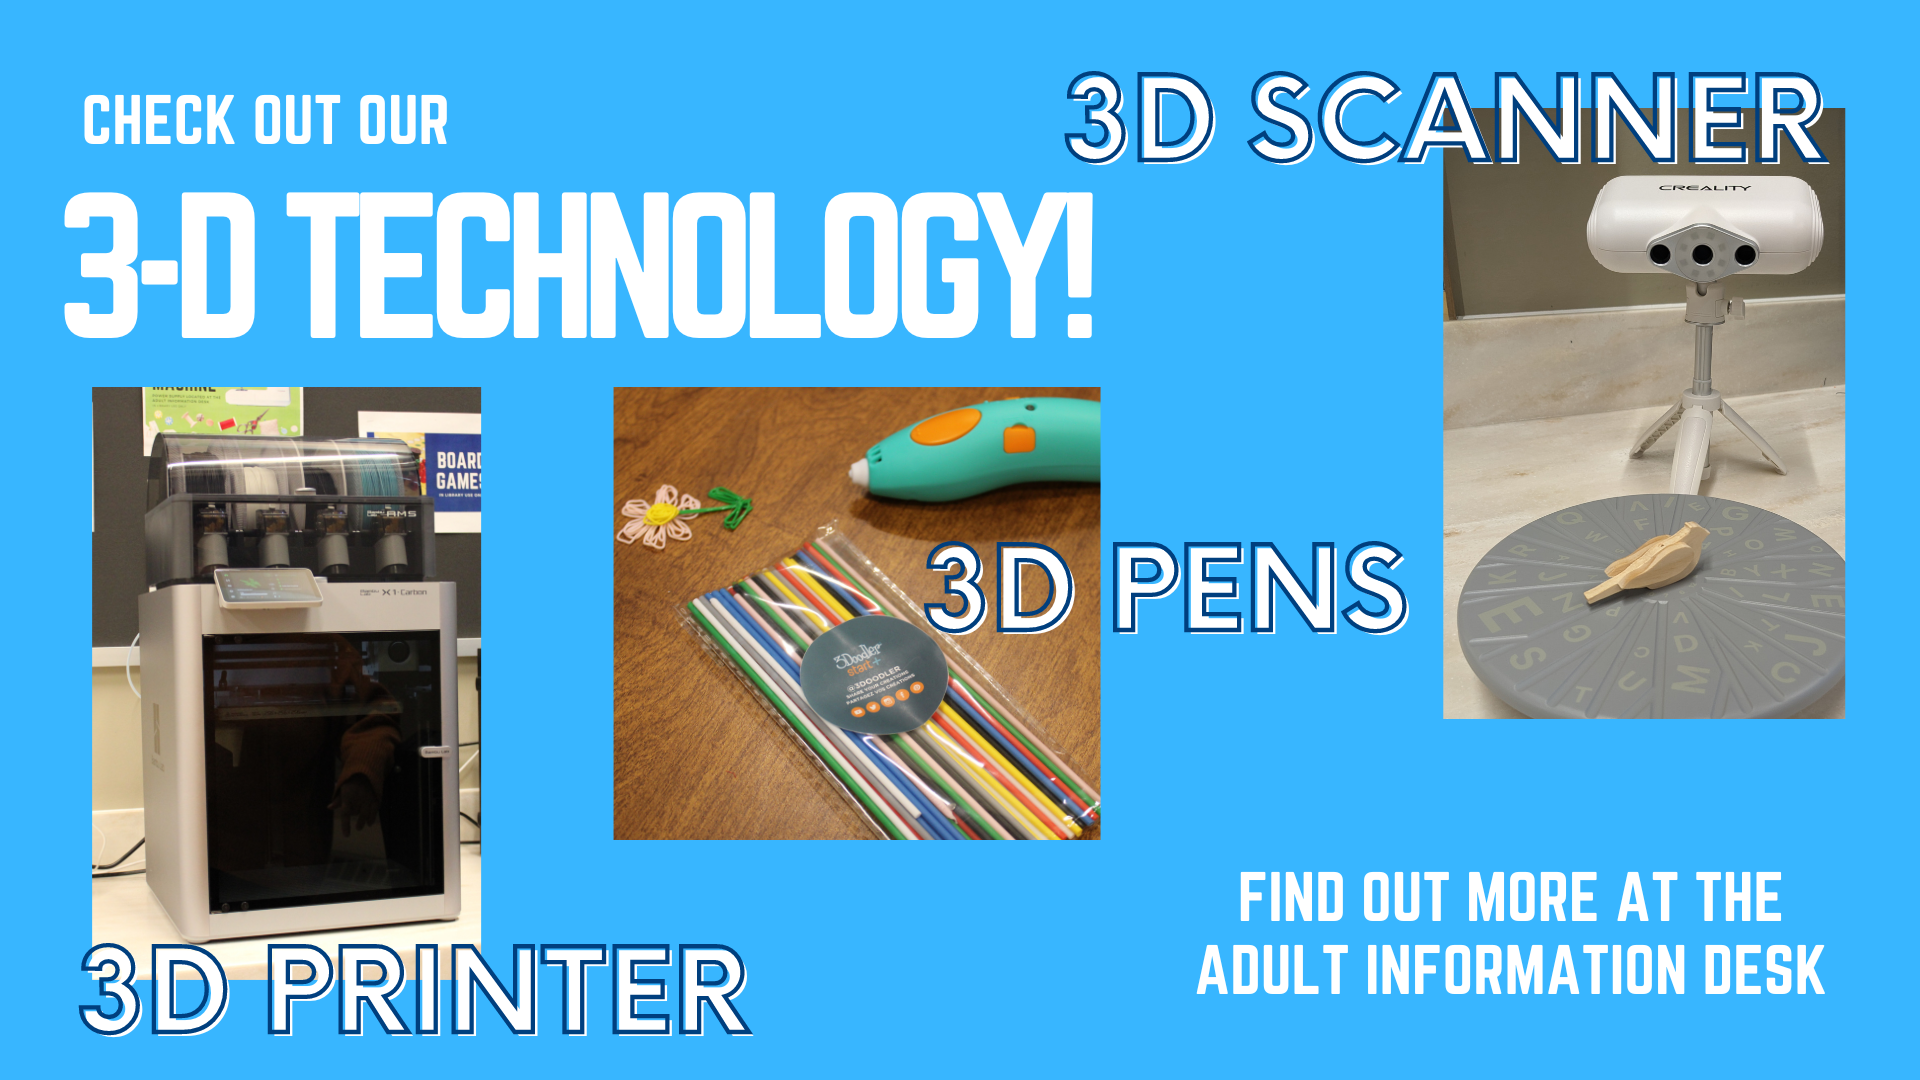 Check out our 3-D technology! 3D Printer, 3D Pens, 3D Scanner. Find out more at the adult information desk.